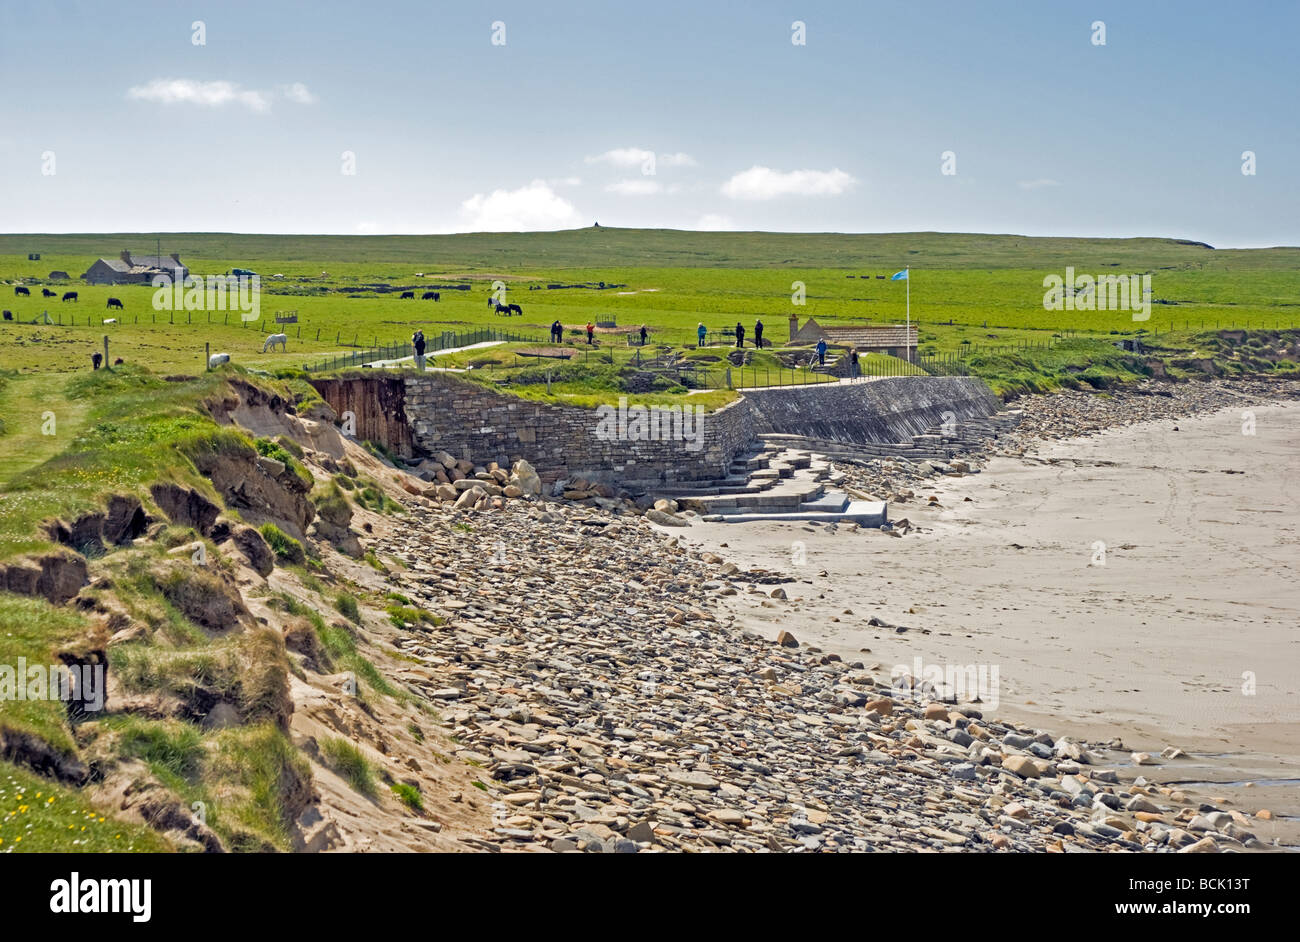 The neolithic village of Skara Brae on Orkney mainland Scotland with ten stone age houses dating from around 3000 years BC Stock Photo